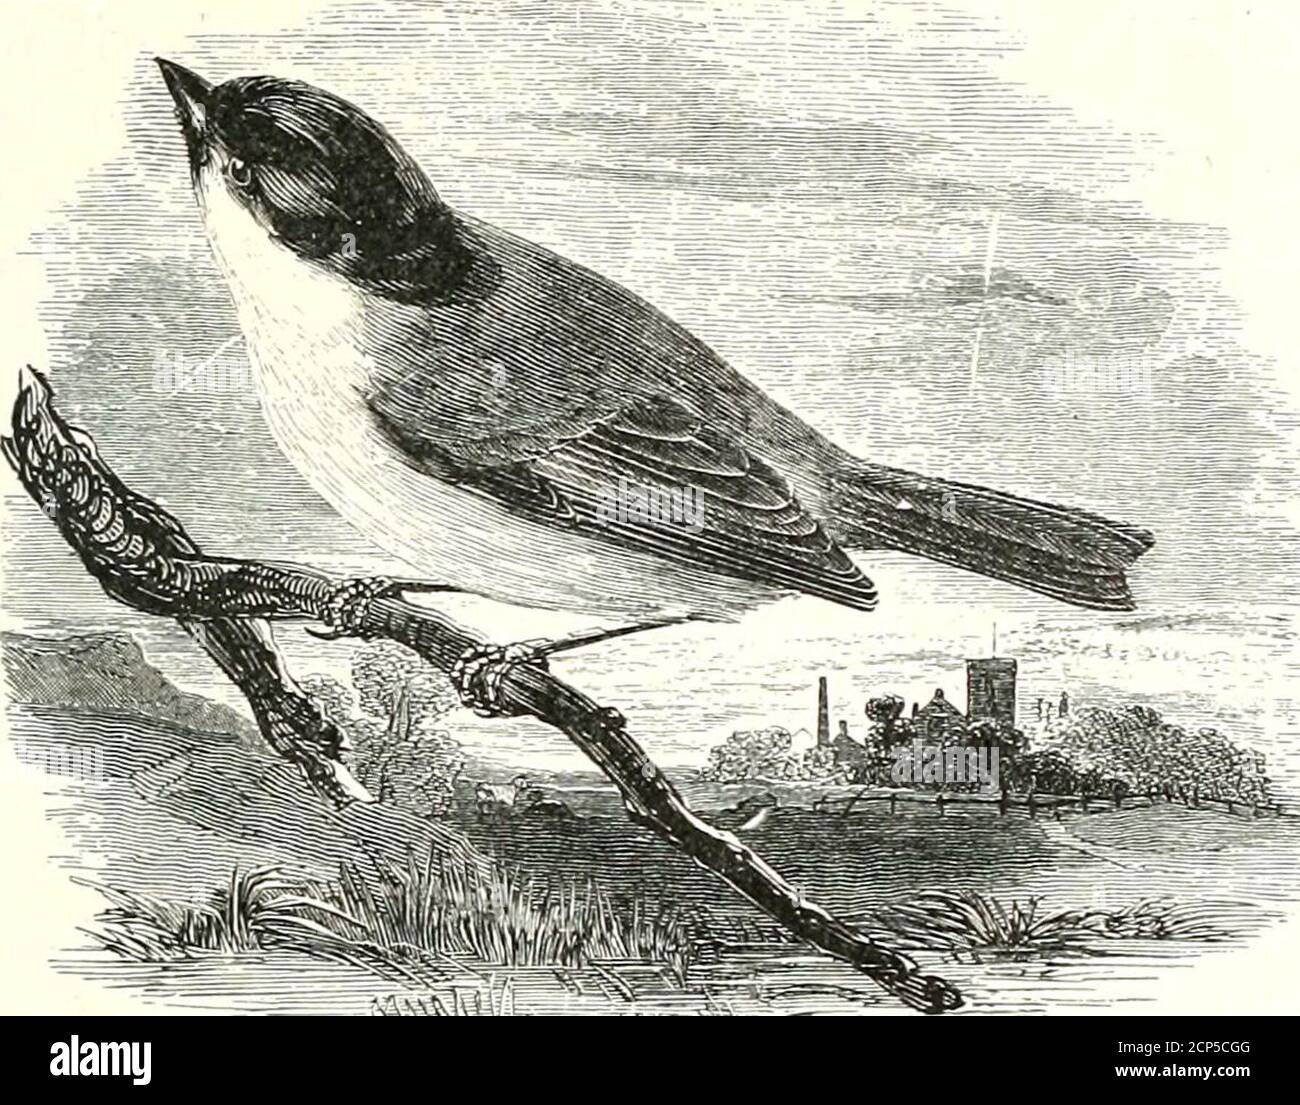 . A history of British birds . MARSH-TITMOUSE. PASSE RES. 495 PA RID A3.. Pahus palusteis, Linnaeus *.THE MAESH-TITMOUSE. Parus palustris. The Marsh-Titmouse, if not so generally distributed assome others of the genus, is yet plentiful as a species in manylocalities, and, as its name implies, is more partial than therest to low tracts of land bearing willows and alders, and toswampy ground near woods; but it is by no means confinedto such situations, and often visits orchards and gardens,though is does not much affect high trees, generally preferringcoppice and brushwood. Like its congeners, i Stock Photo